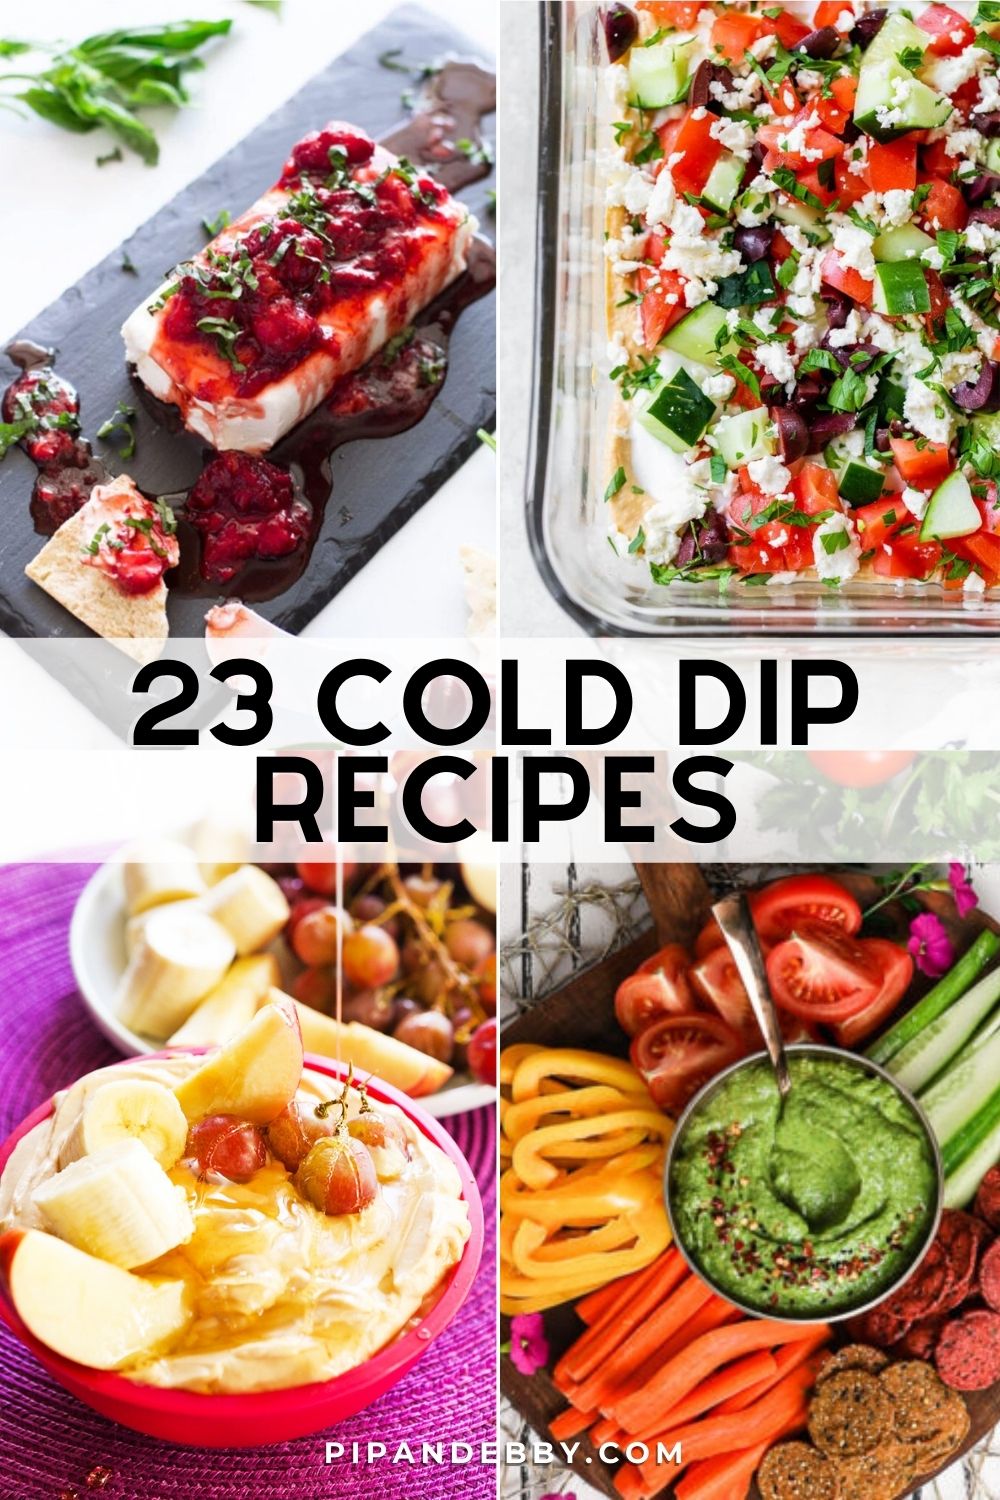 Four dip recipe photos in a grid with text overlay reading, "23 cold dip recipes."